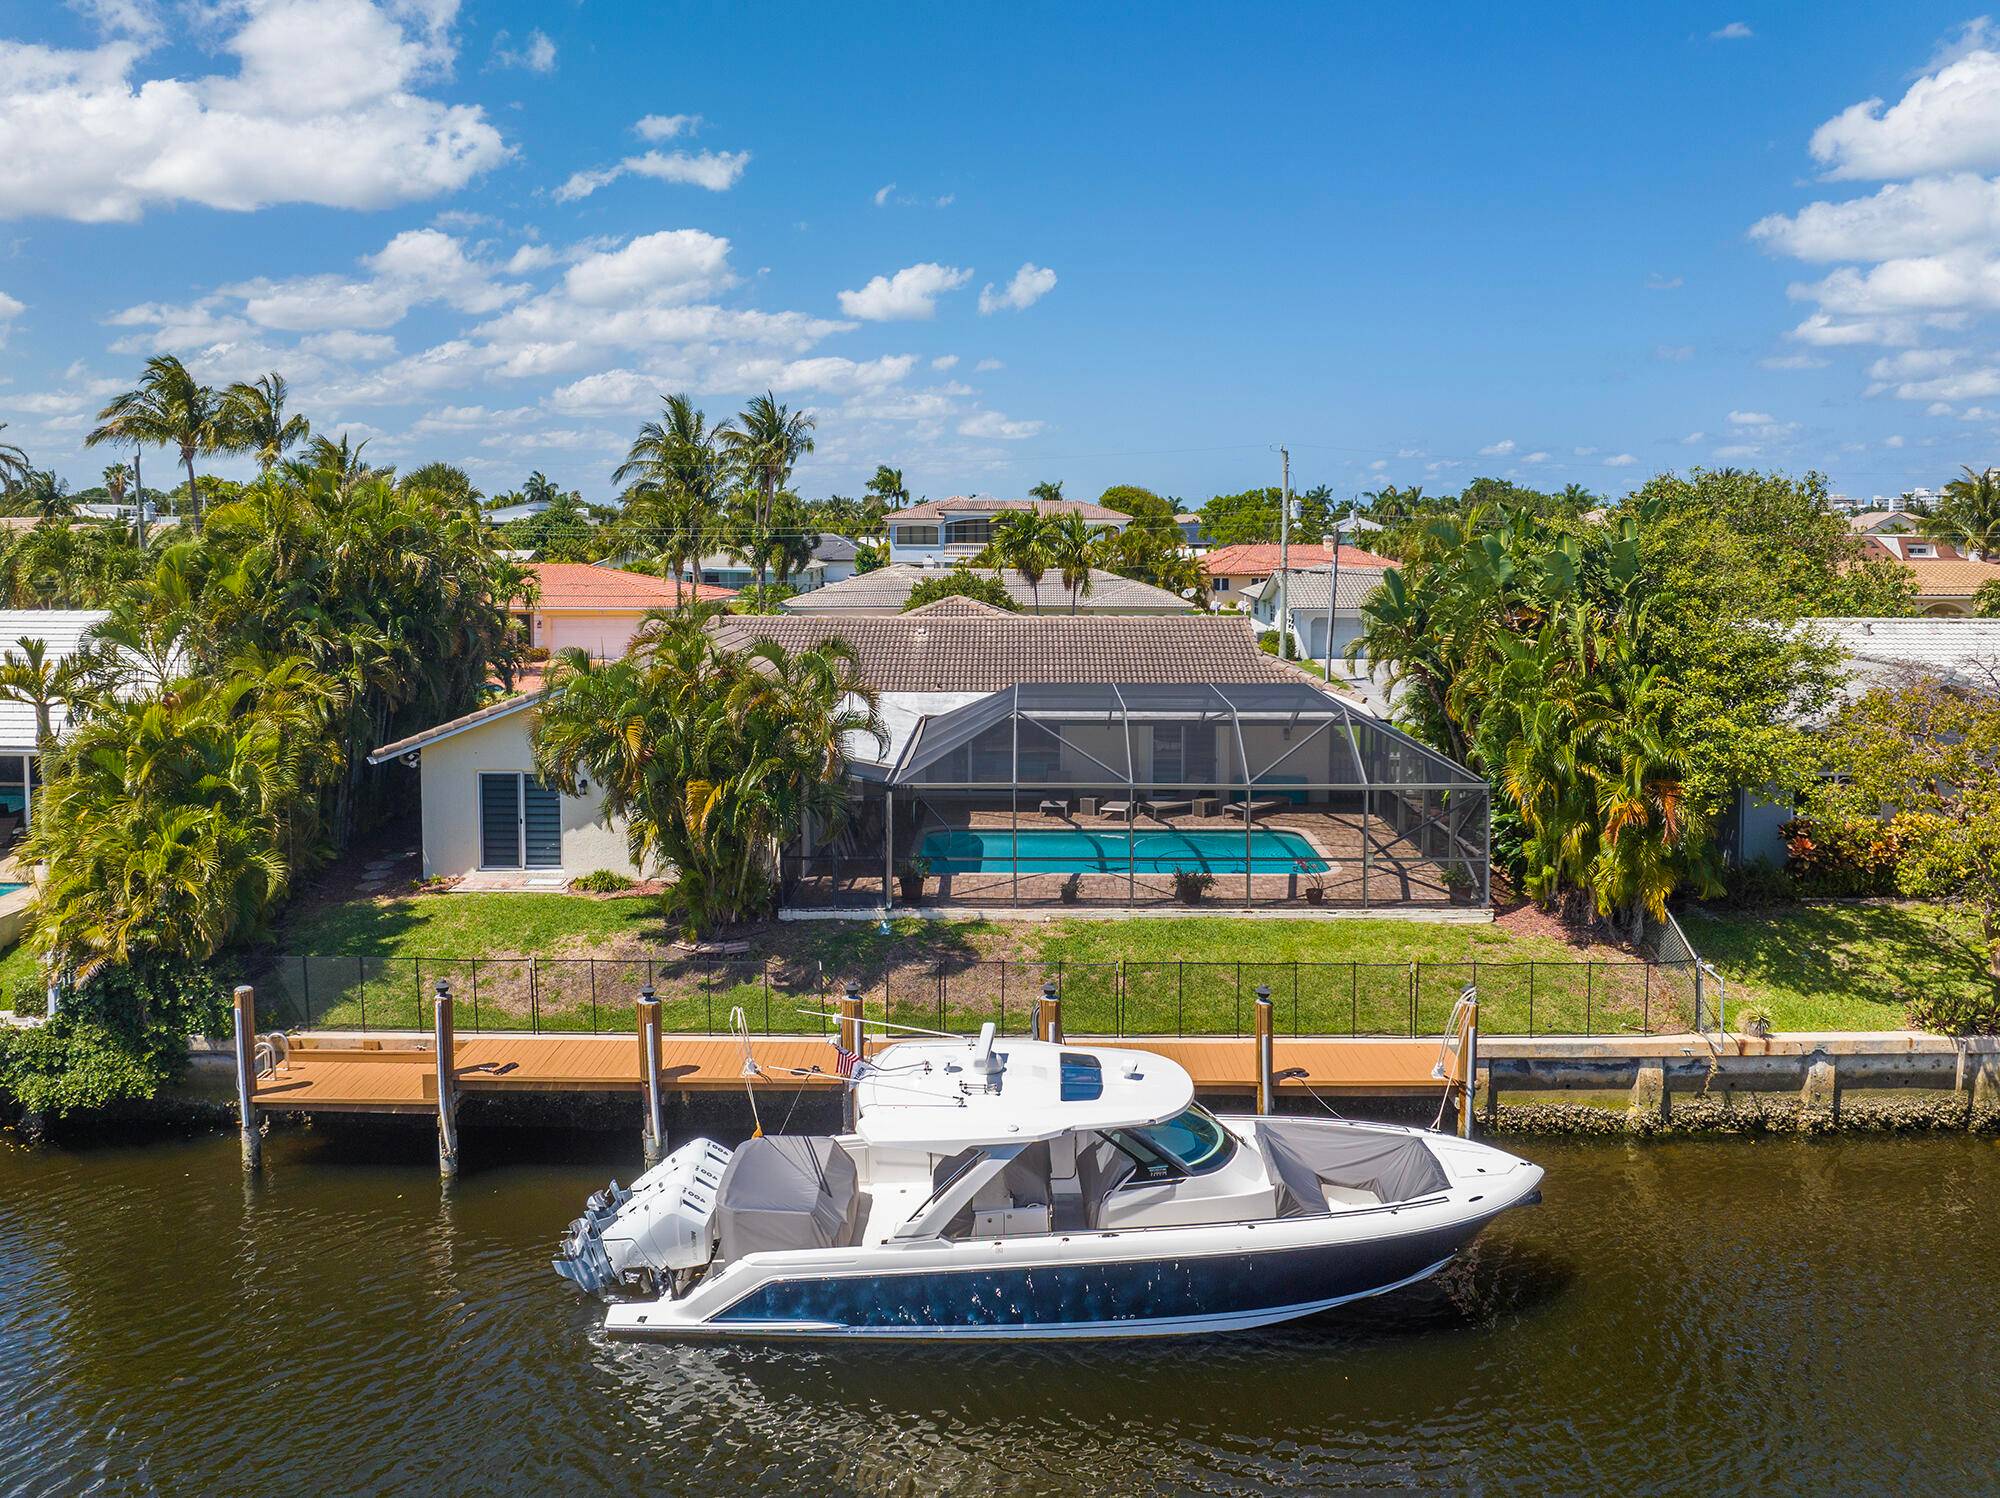 Welcome to 770 Dover Street, a one level waterfront sanctuary offering the ultimate Boca Raton lifestyle !